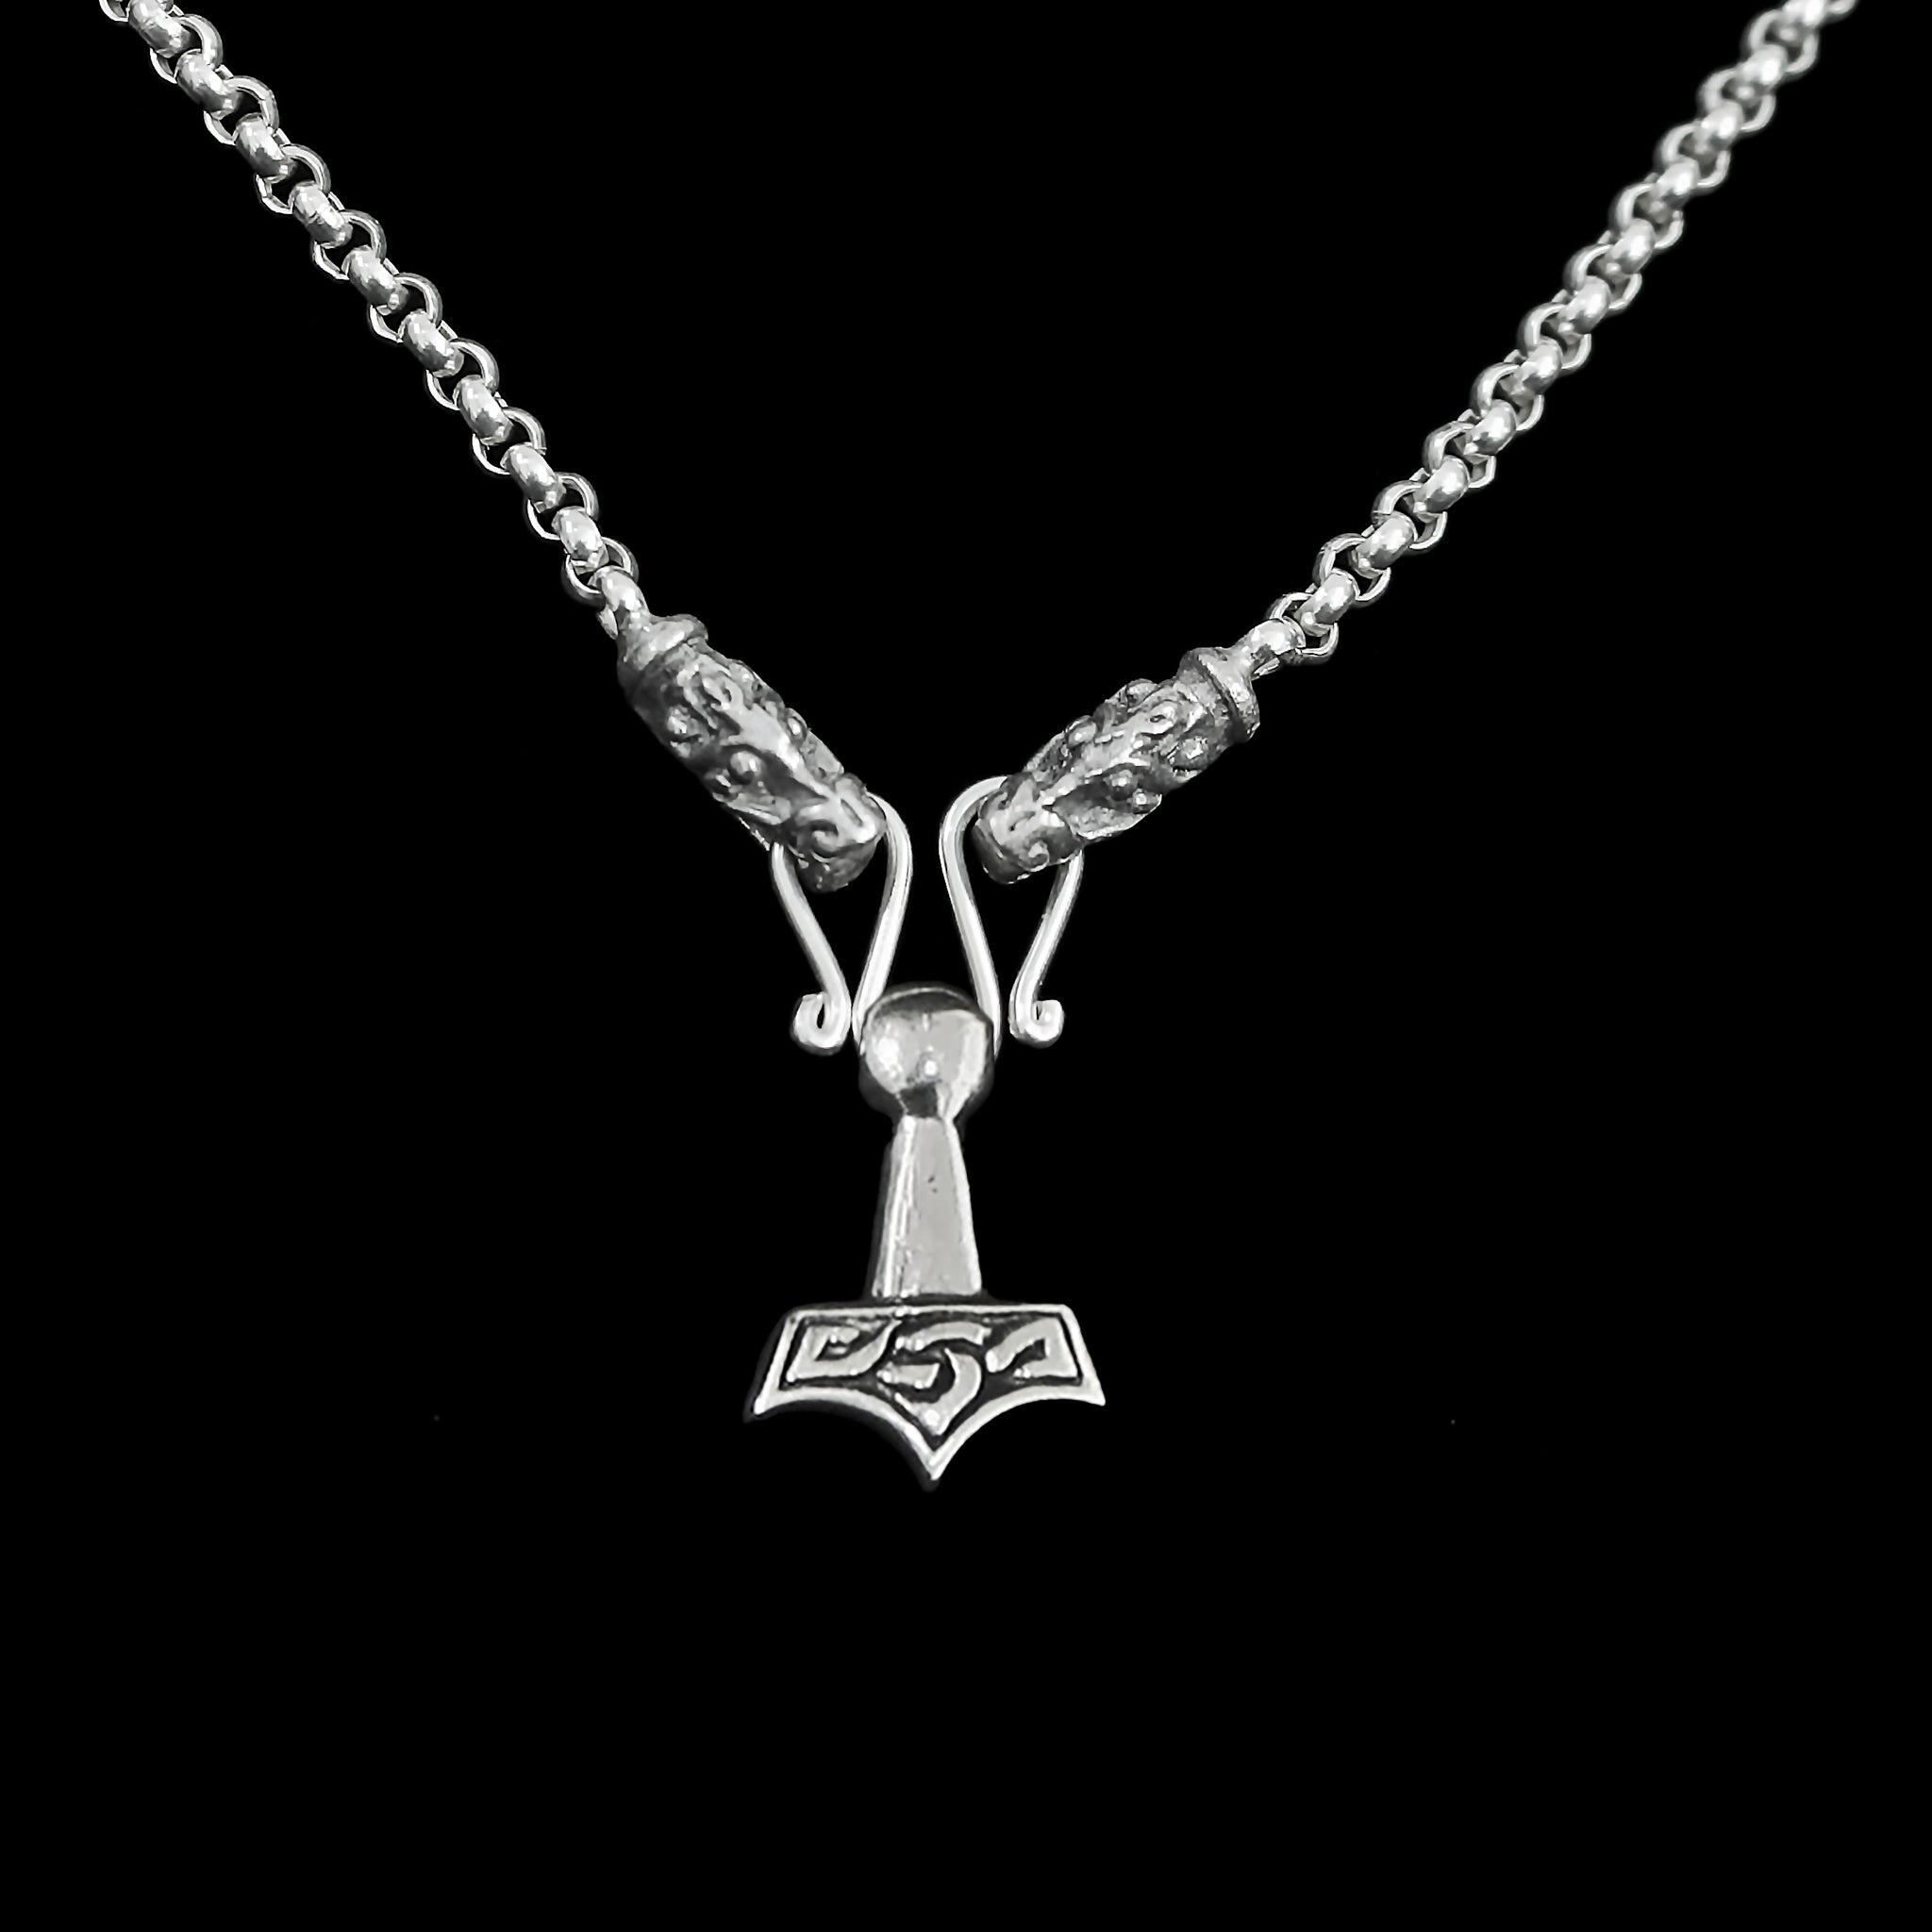 Slim Silver Anchor Chain Pendant Necklace with Gotland Dragon Heads with Small Knotwork Hammer Pendant